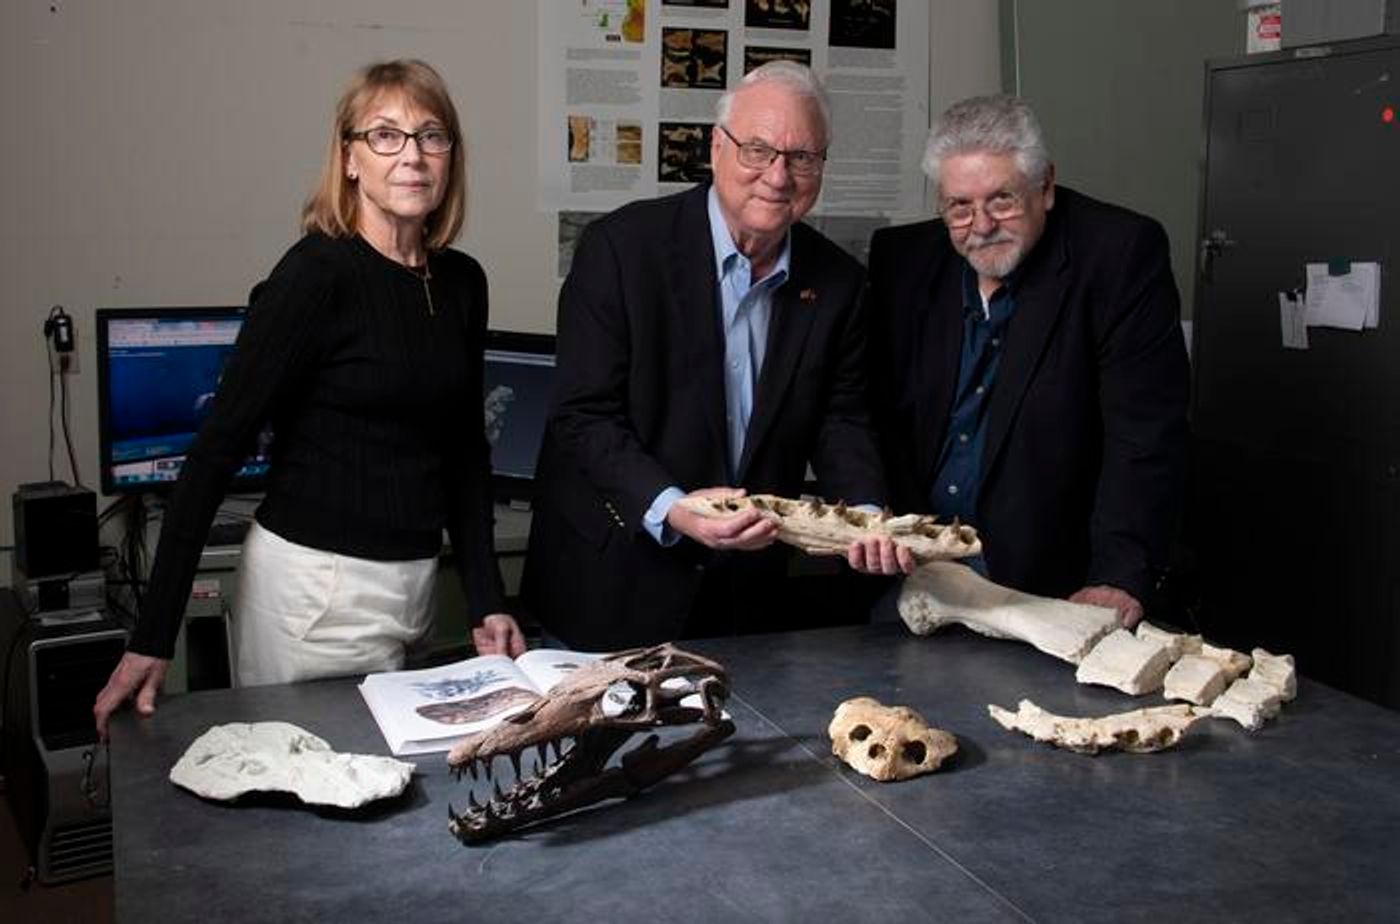 SMU paleontologists Diana P. Vineyard, Louis L. Jacobs and Michael J. Polcyn, standing with fossils found in Angola. / Credit: SMU, Hillsman S. Jackson